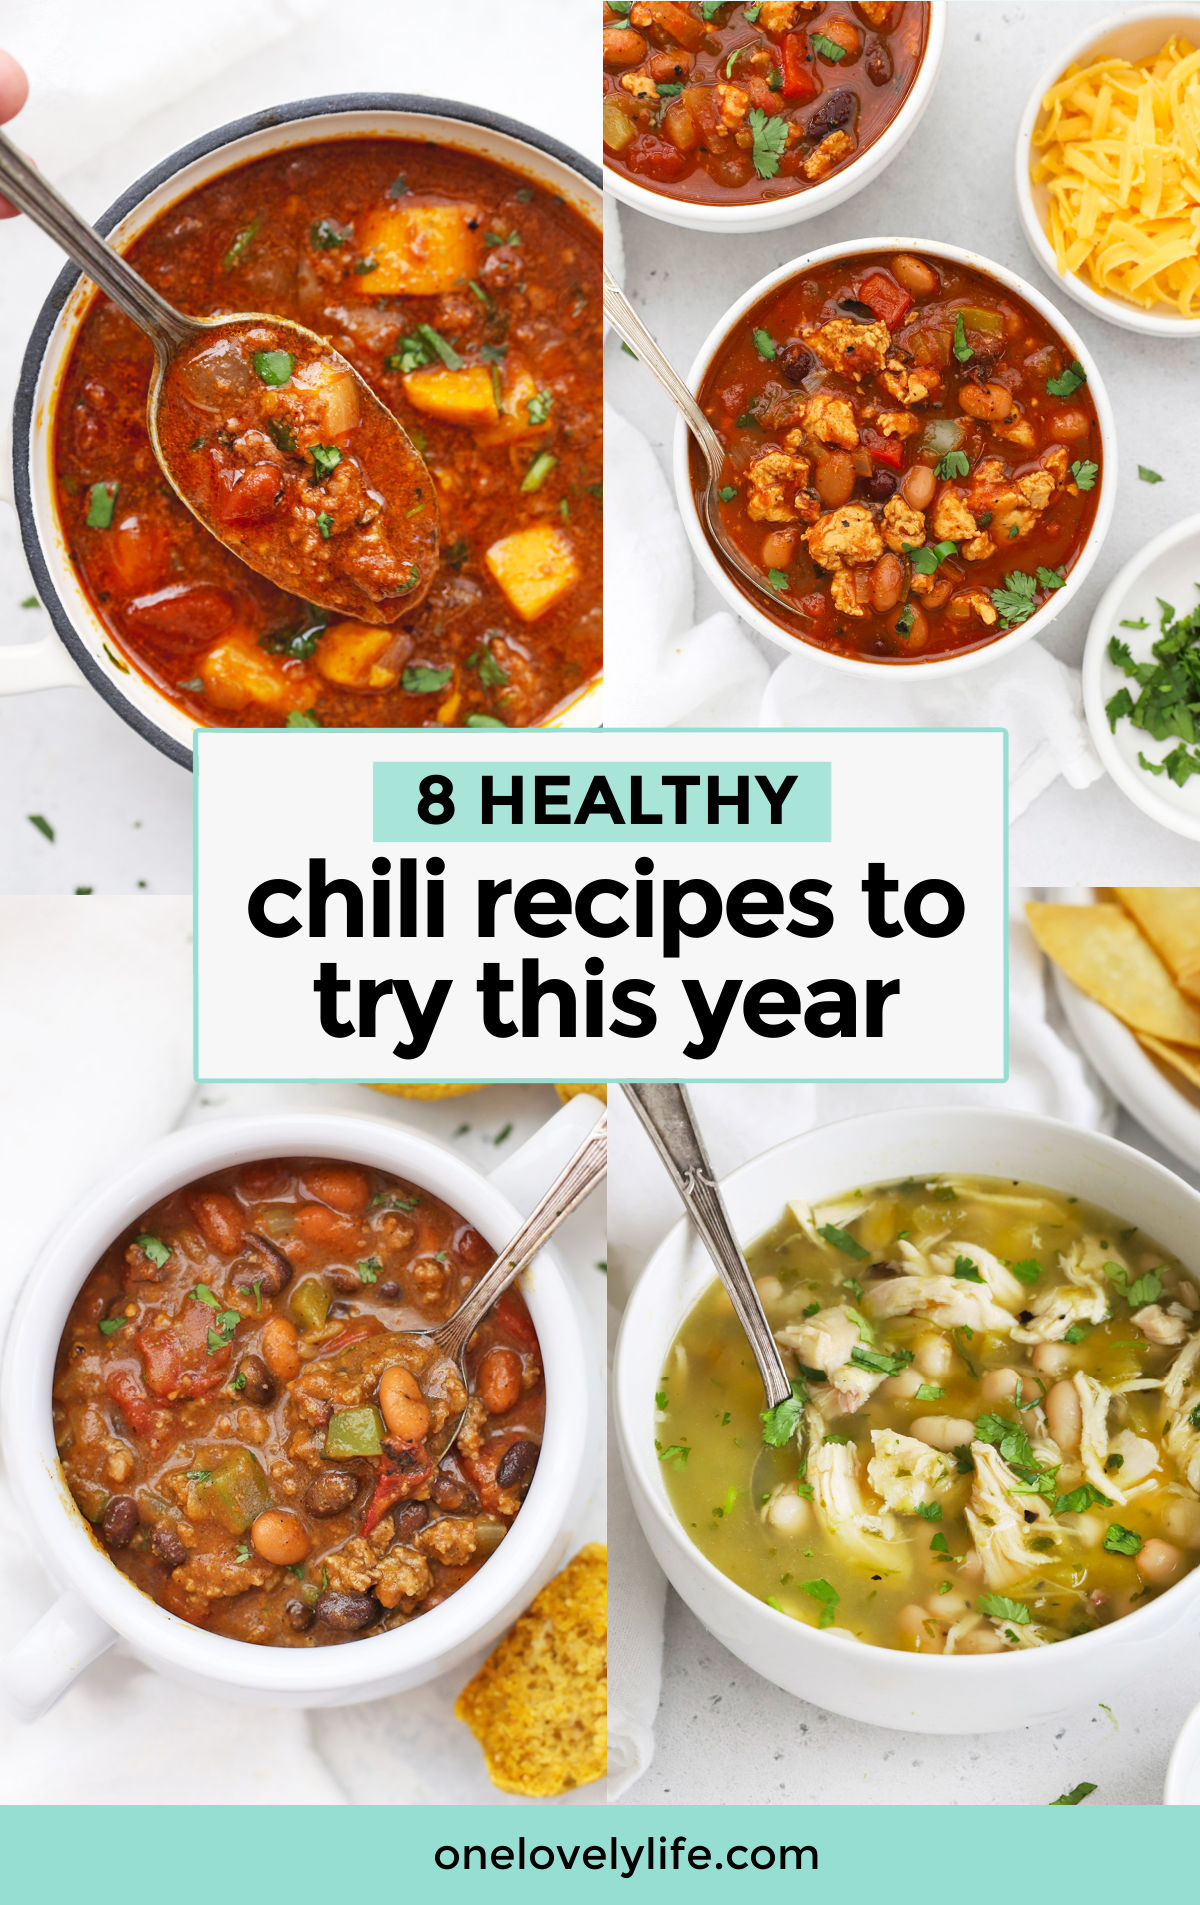 We LOVE healthy chili recipes and these easy recipes always deliver! Choose from gluten-free, paleo, and vegetarian options! // instant pot chili recipe // slow cooker chili recipe // crock pot chili recipe // crockpot chili recipe // vegan chili recipe // paleo chili recipe // gluten free chili recipes / healthy chili recipe / healthy dinner recipes // healthy lunch recipes / easy chili recipes / gluten free chili recipes / gluten free chili recipe